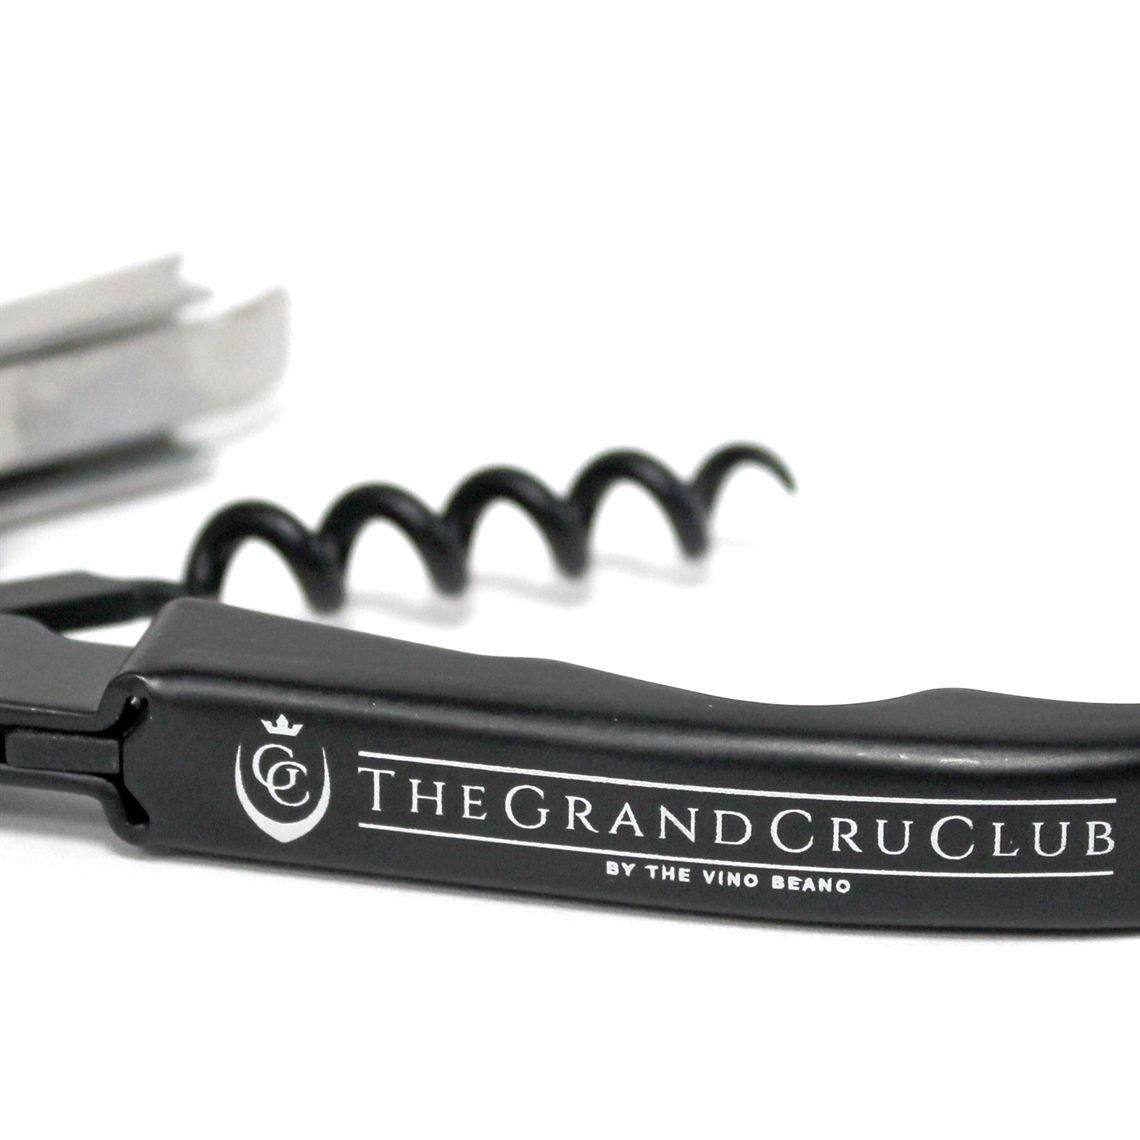 View more branded corkscrews & bottle openers from our Branded Corkscrews & Bottle Openers range